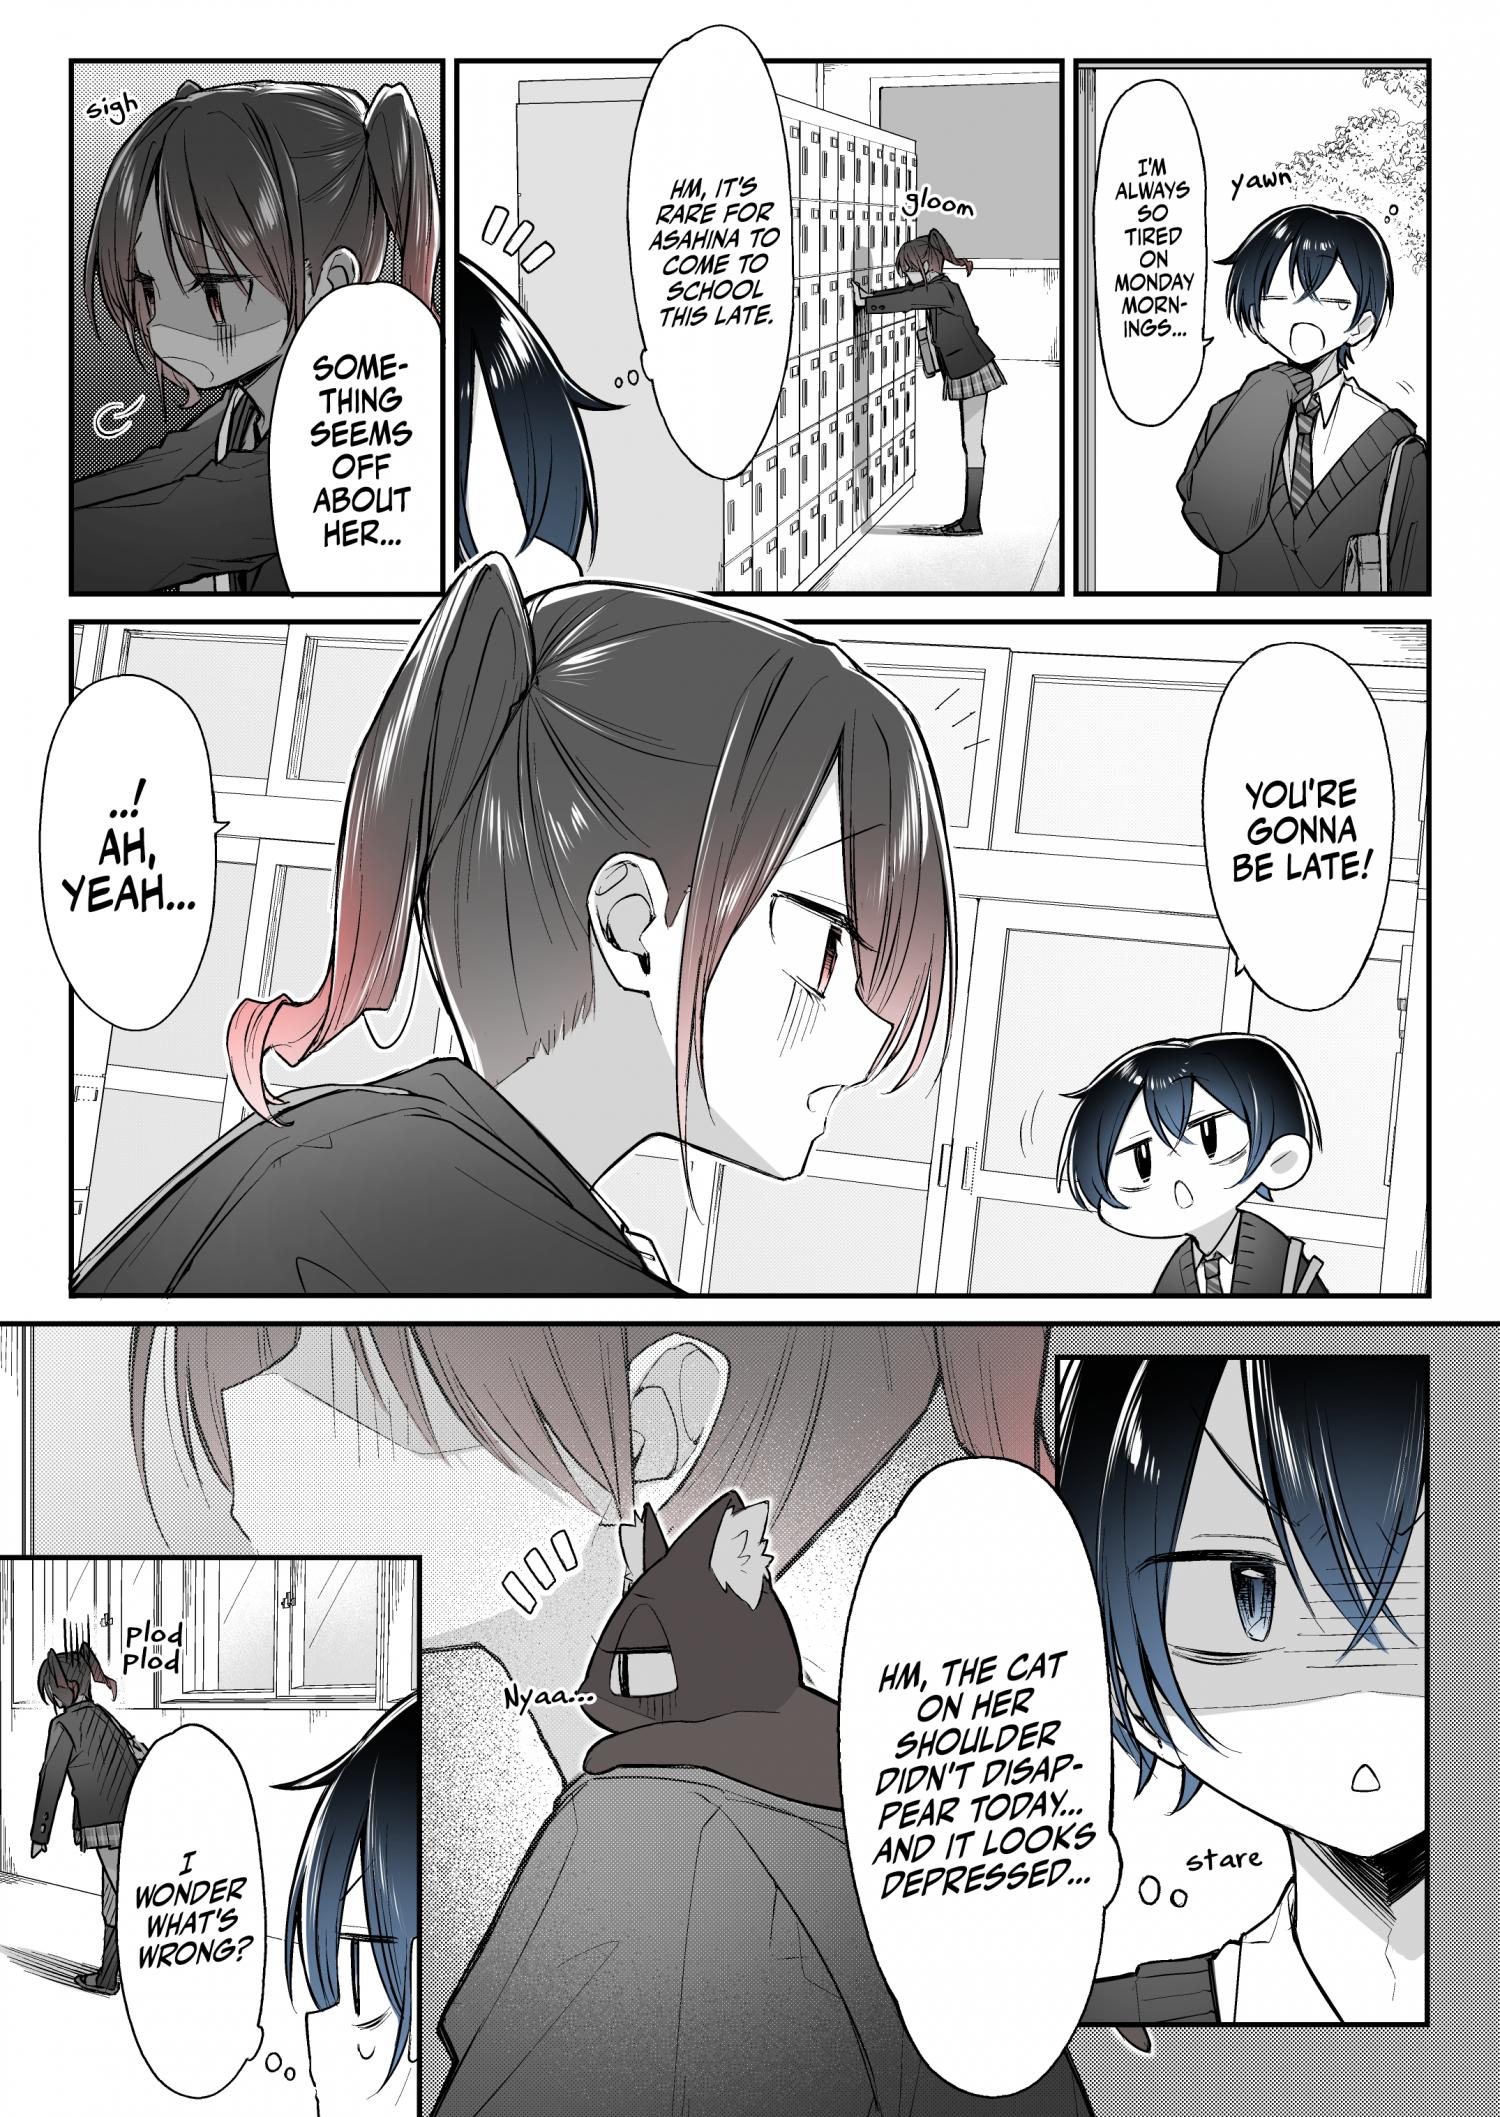 Blushing Because Of You (Serialization) Ch.5 Page 1 - Mangago